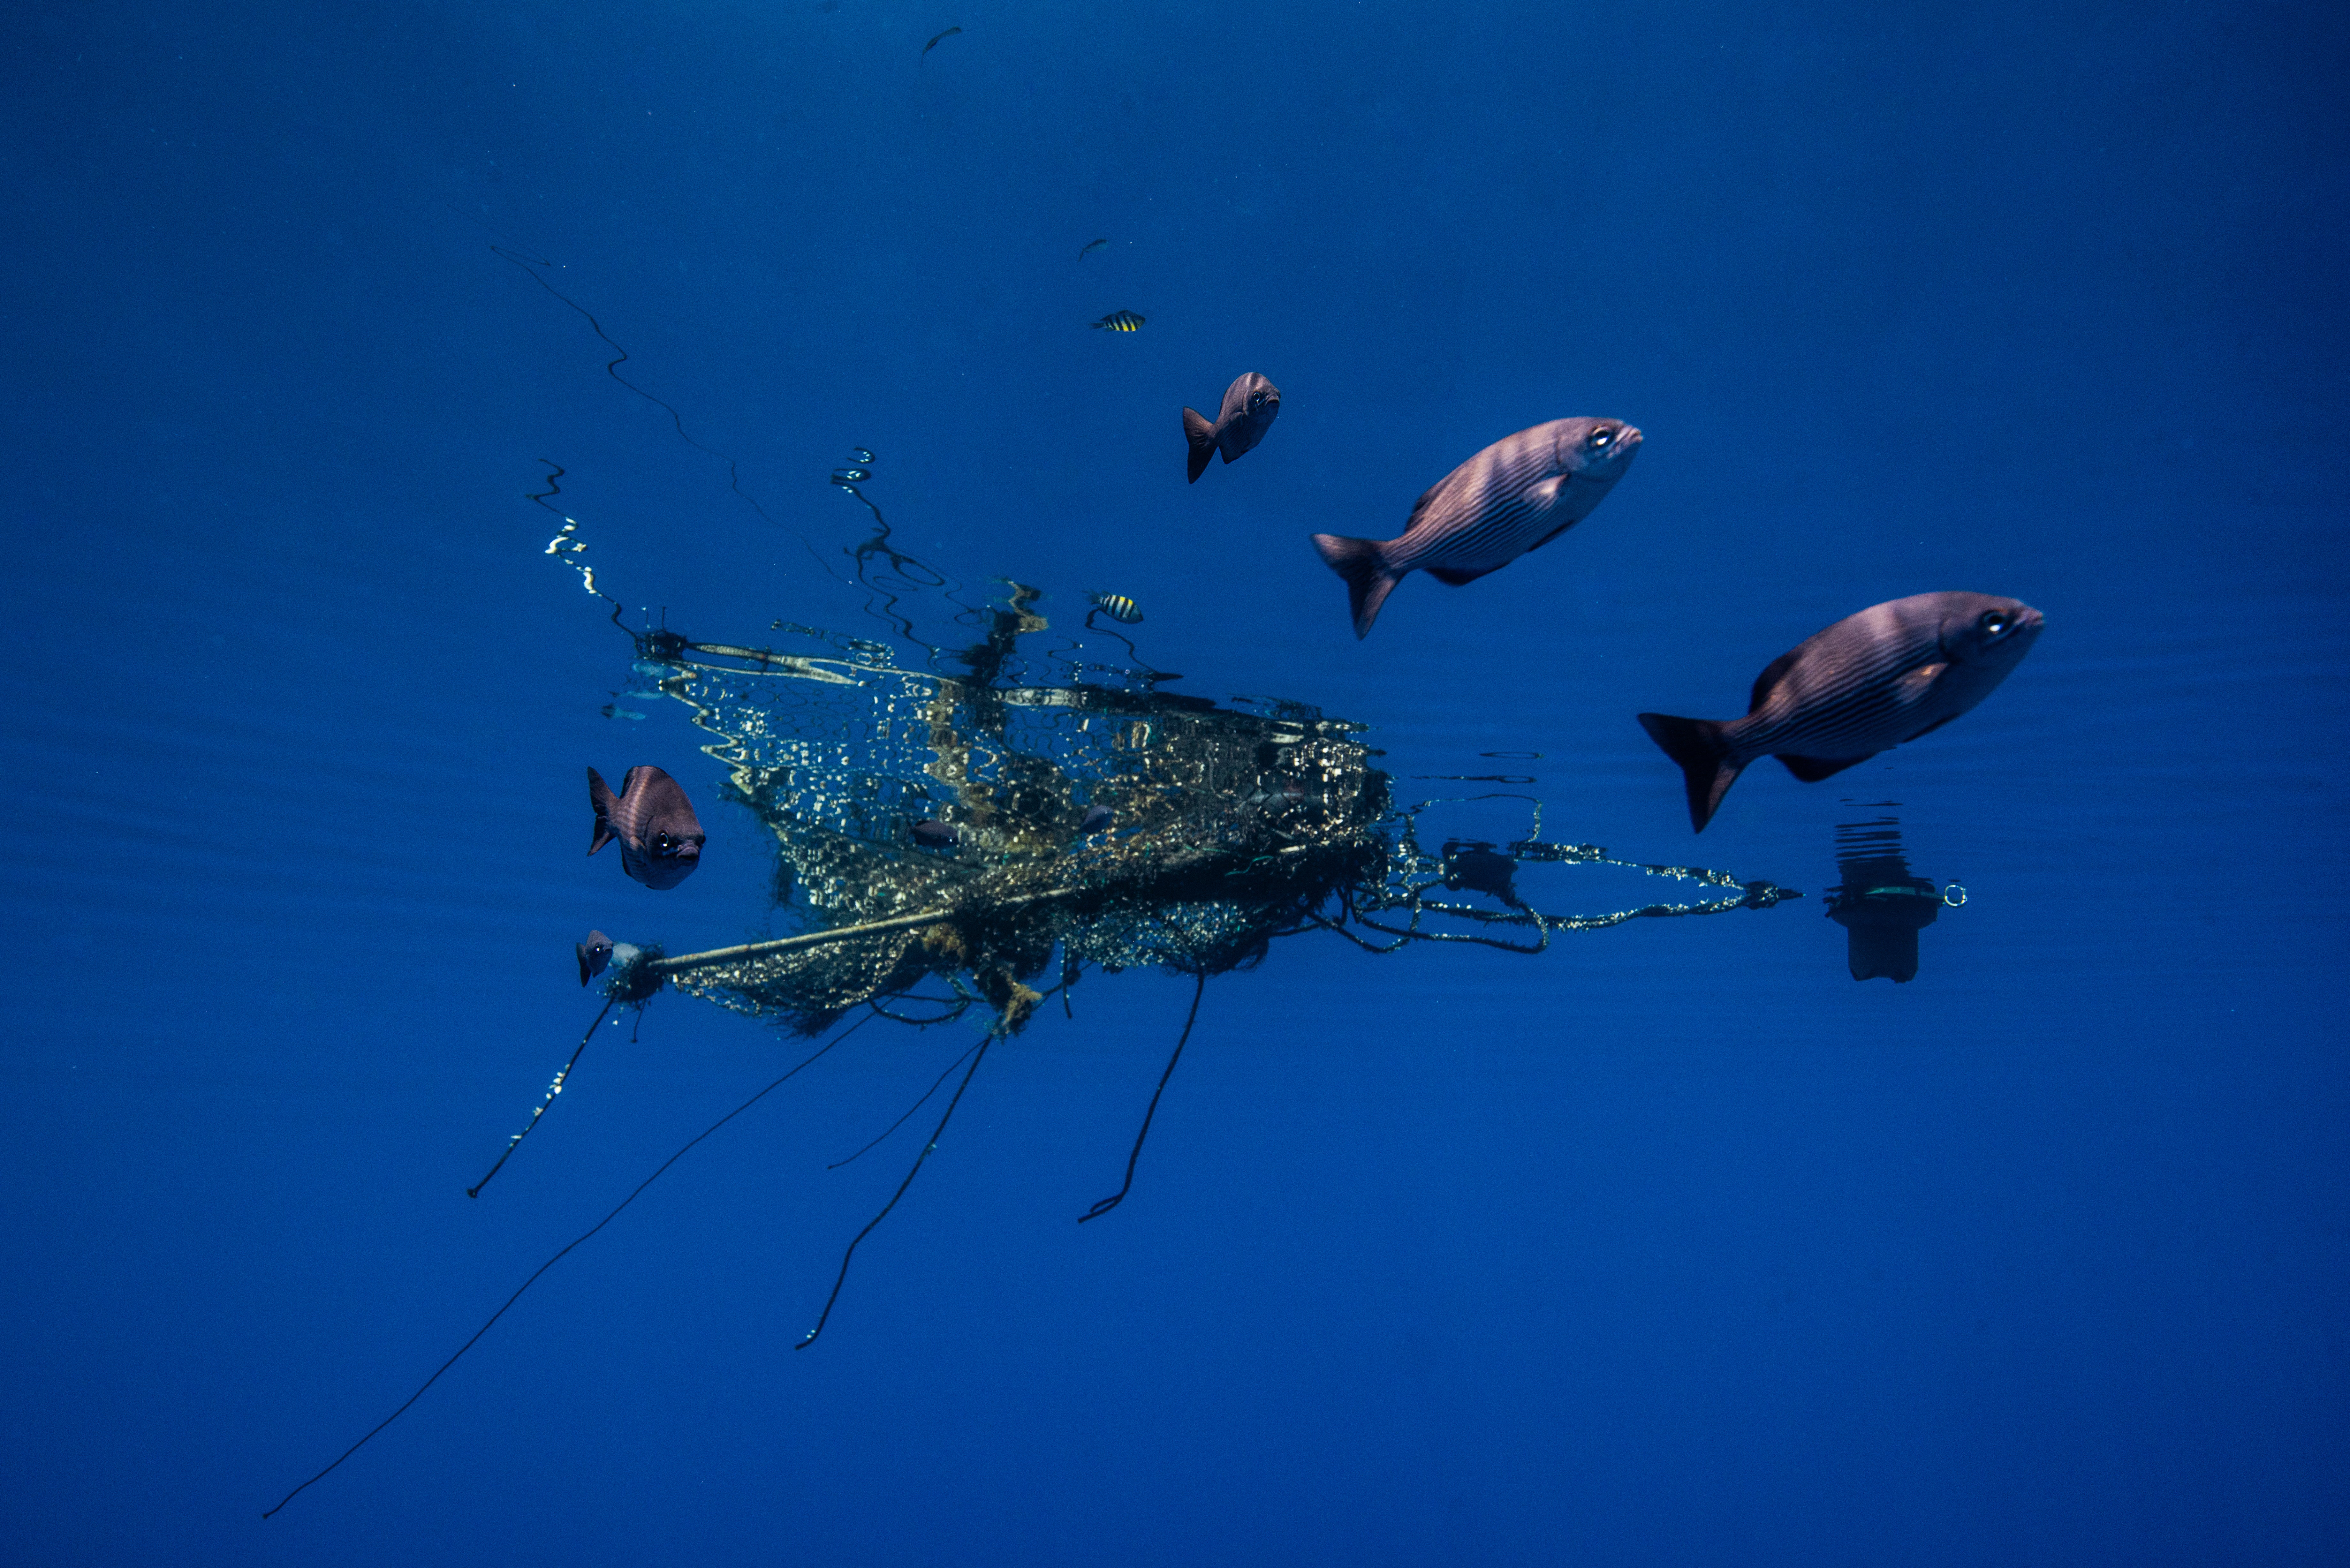 ‘At least 10 per cent of ocean plastics comes from the fishing industry’